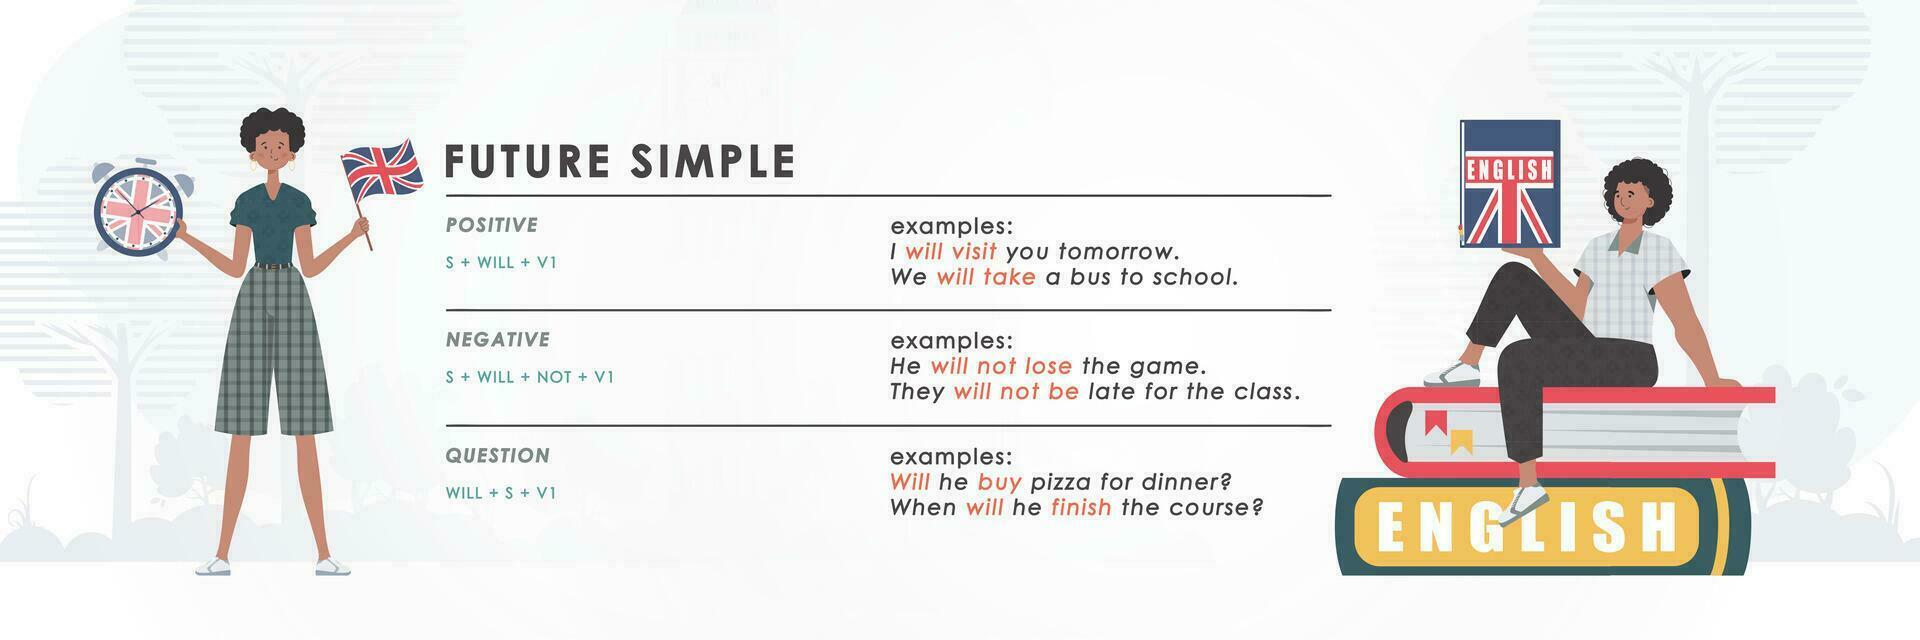 Future simple rule. poster for learning english. trendy style. Vector. vector